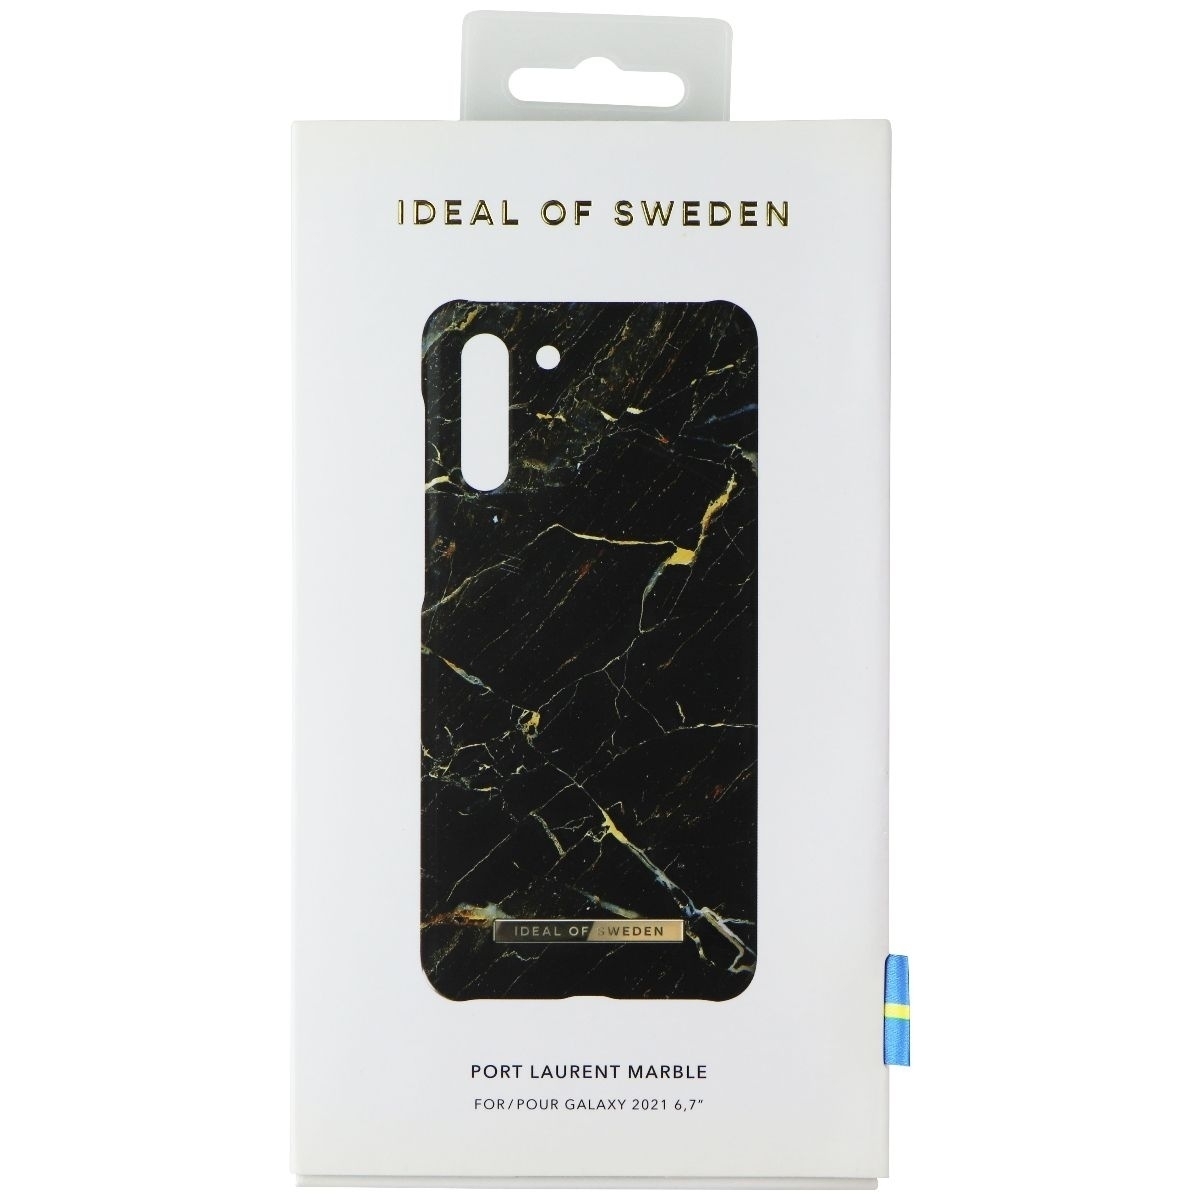 IDeal Of Sweden Printed Case For Samsung Galaxy S21 Plus - Port Laurent Marble